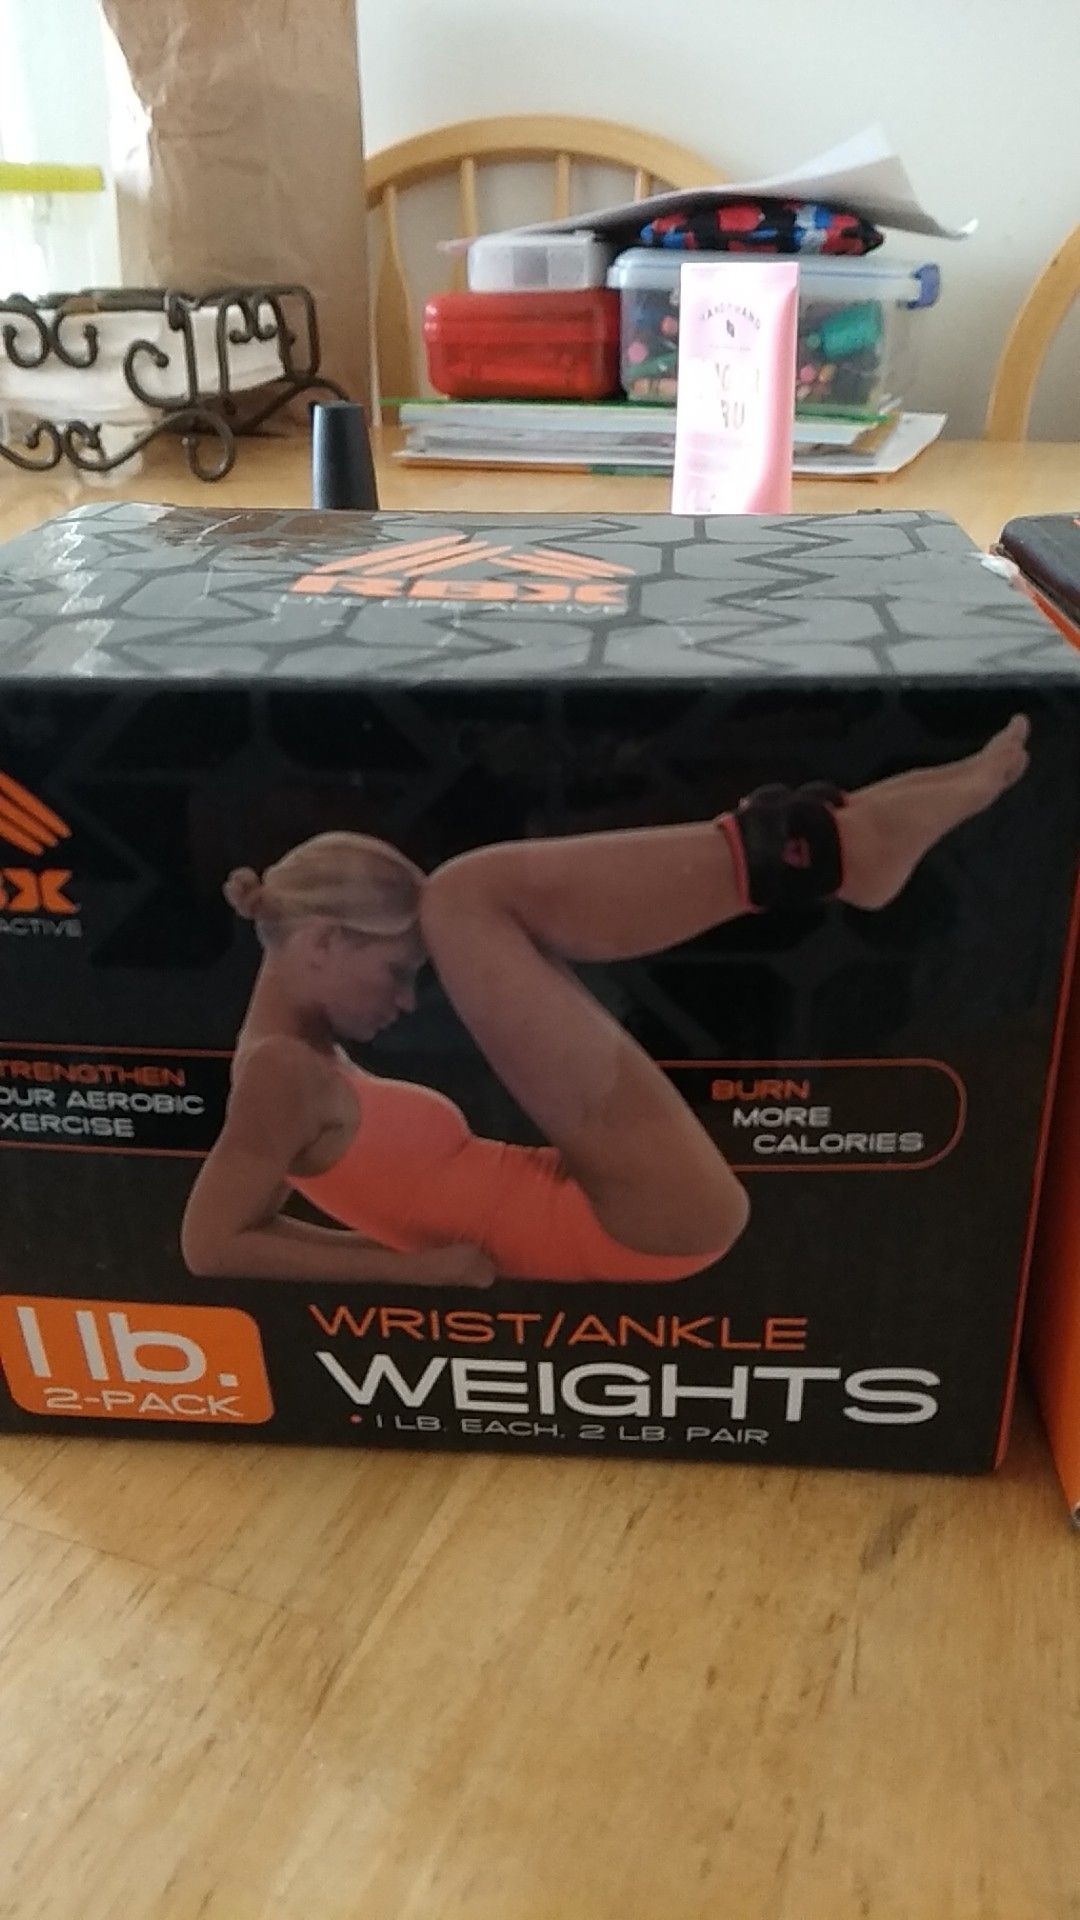 Wrist/ankle weights